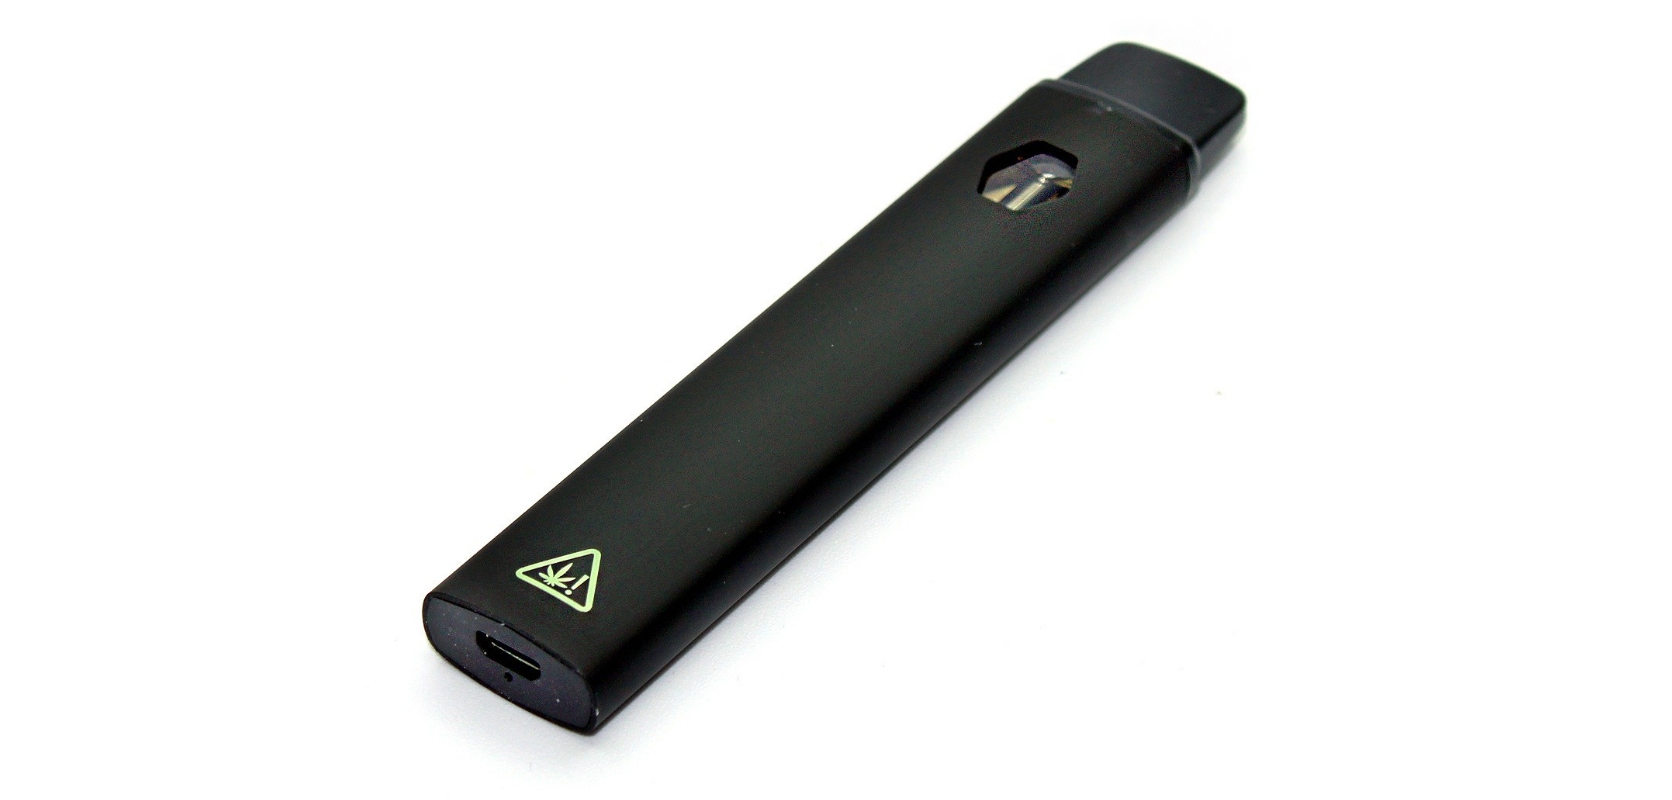 Device-specific cannabis cartridges can only be used with the specific batteries they were designed for.